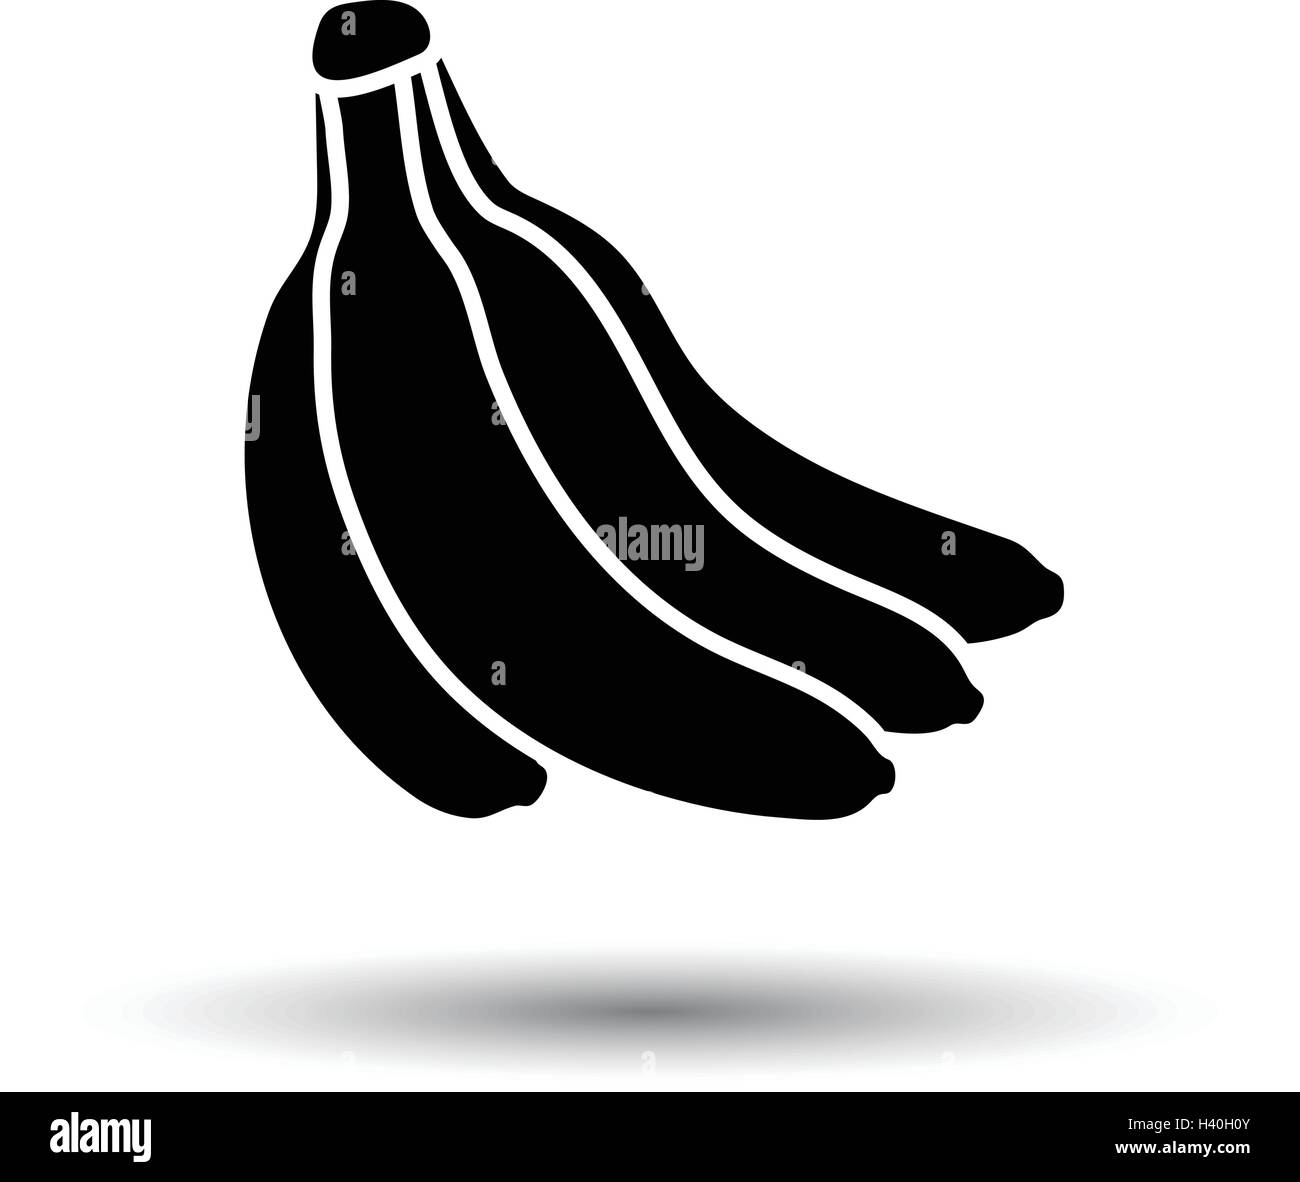 Banana icon. White background with shadow design. Vector illustration. Stock Vector